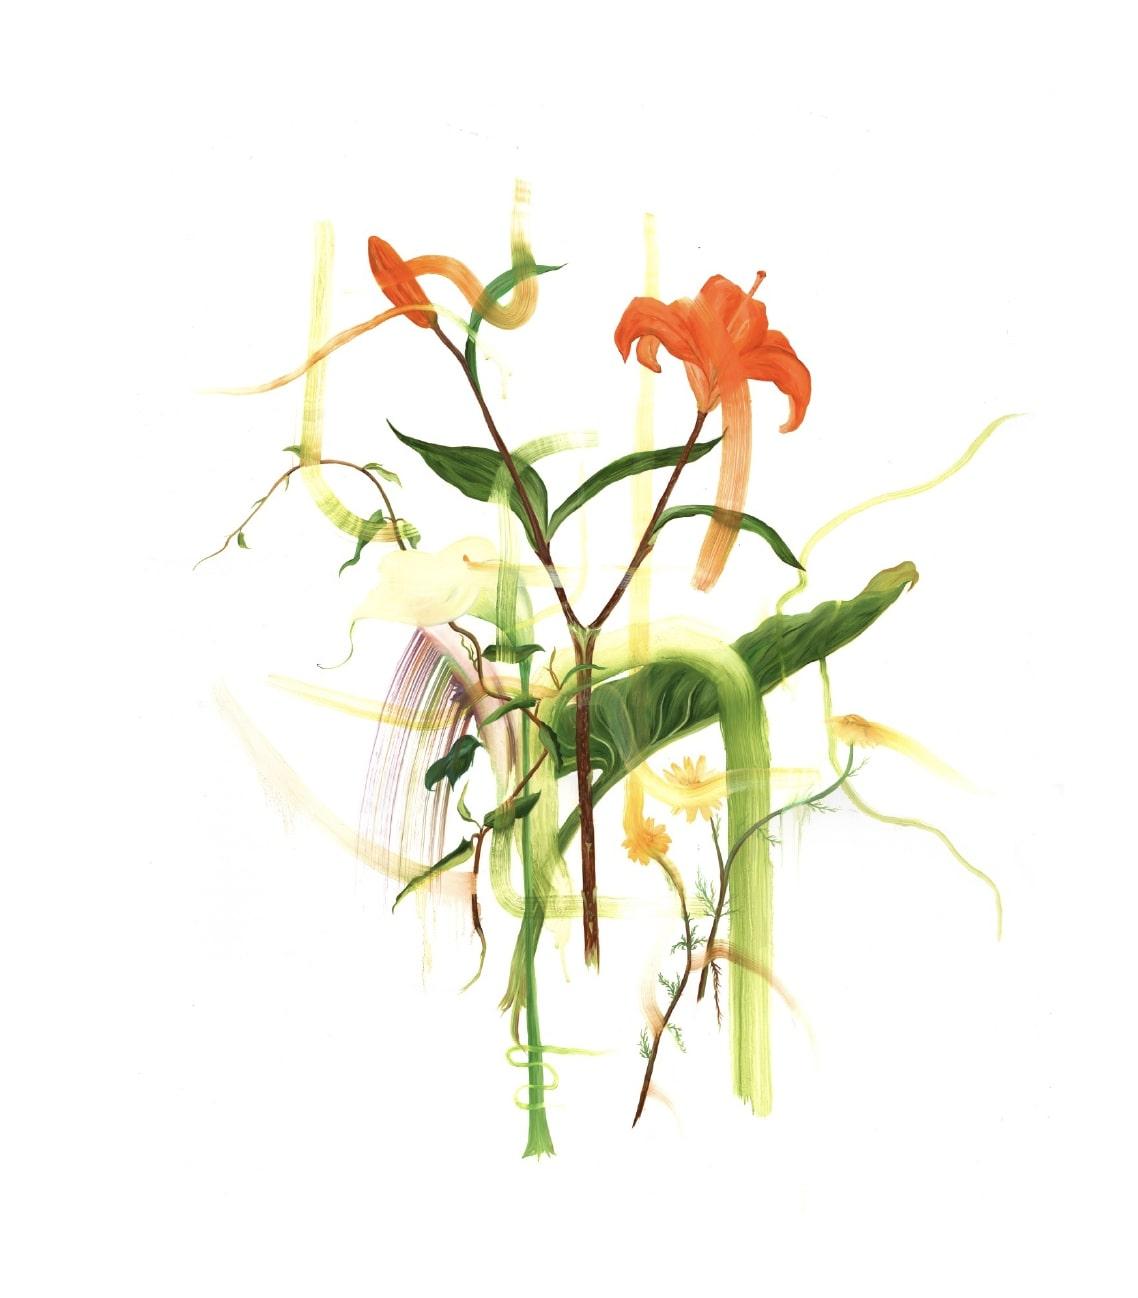 Rin Lack Abstract Print - Calla Suspension- Rectangular Floral Archival Print Edition on Paper  